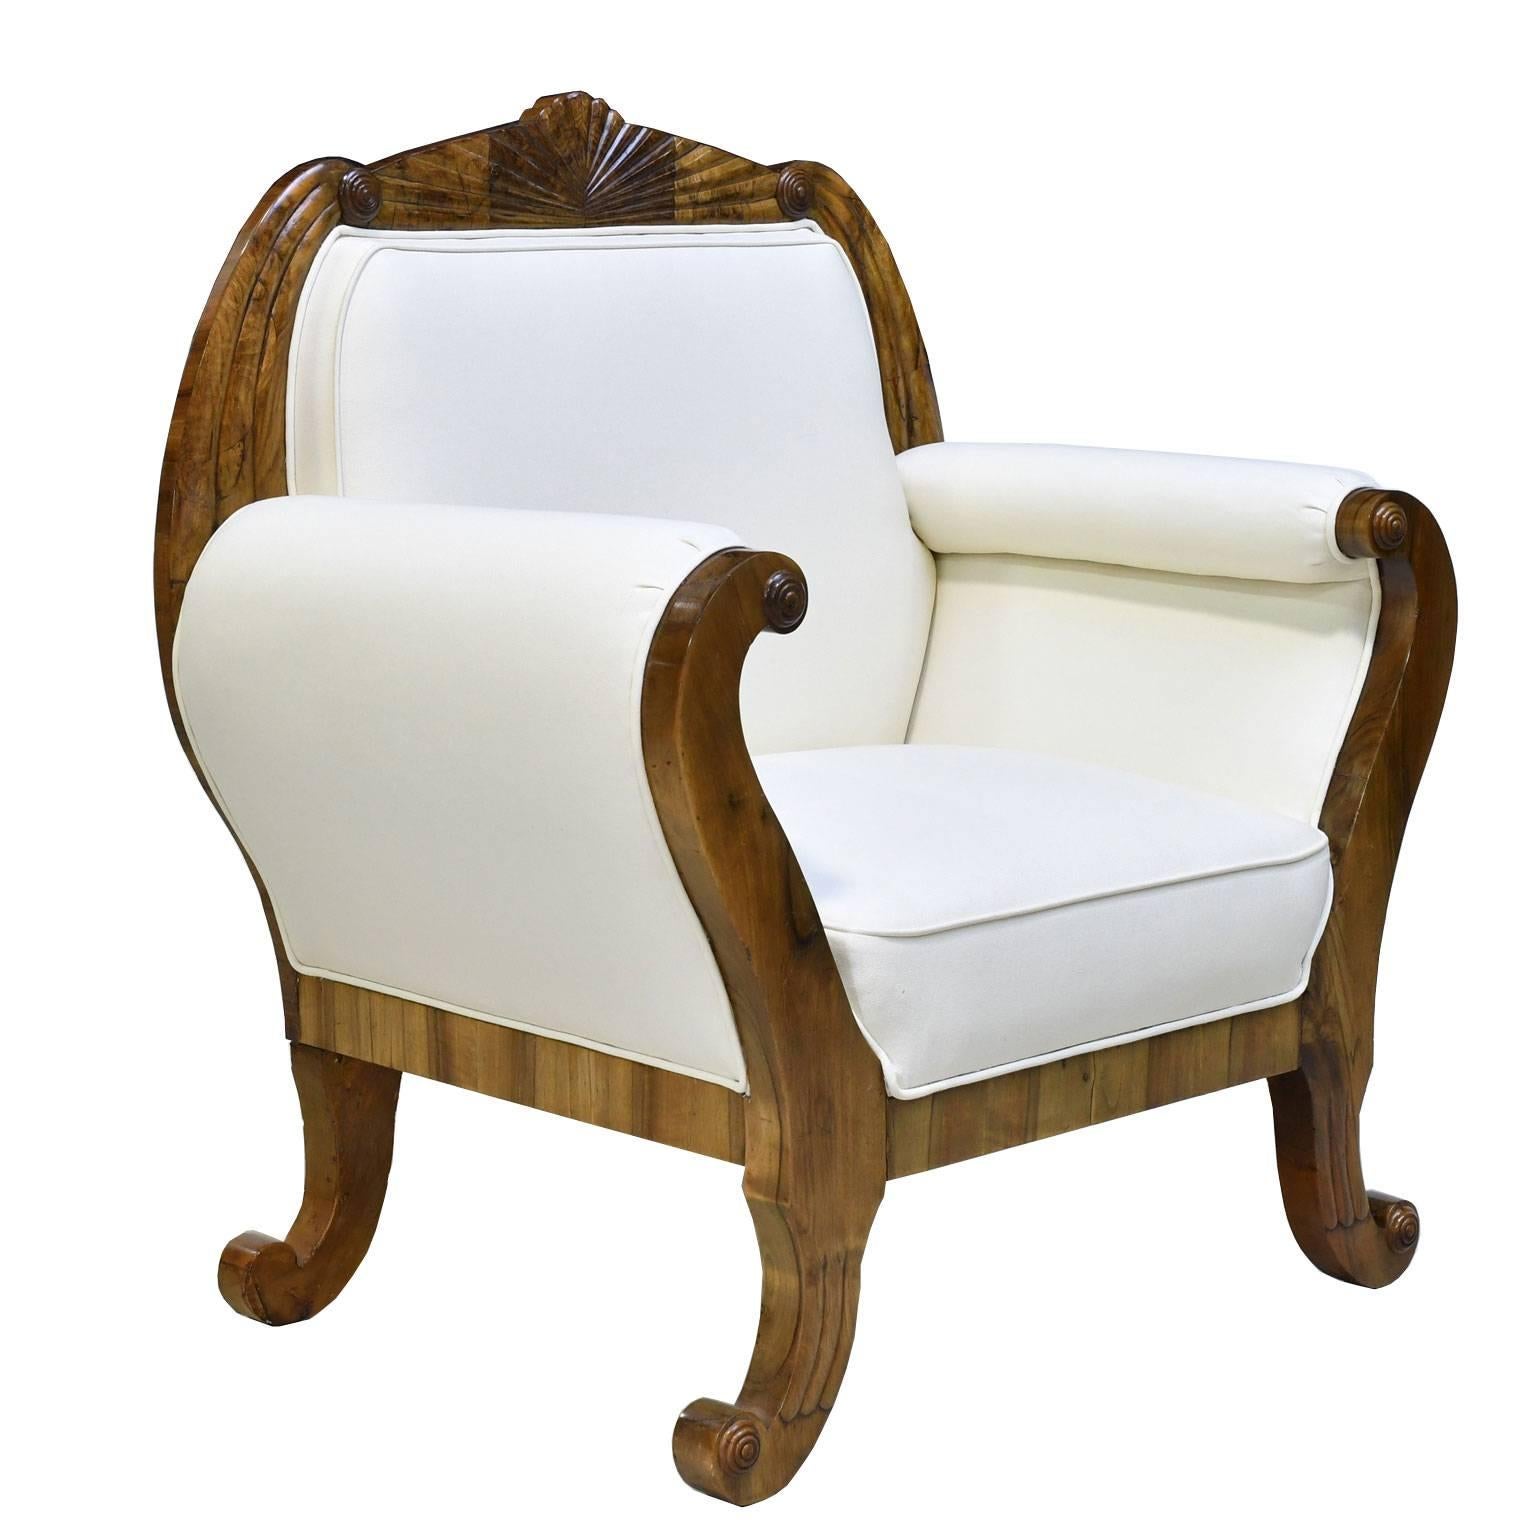 Polished Pair of South German Biedermeier Armchairs or Bergères in Walnut, circa 1830 For Sale